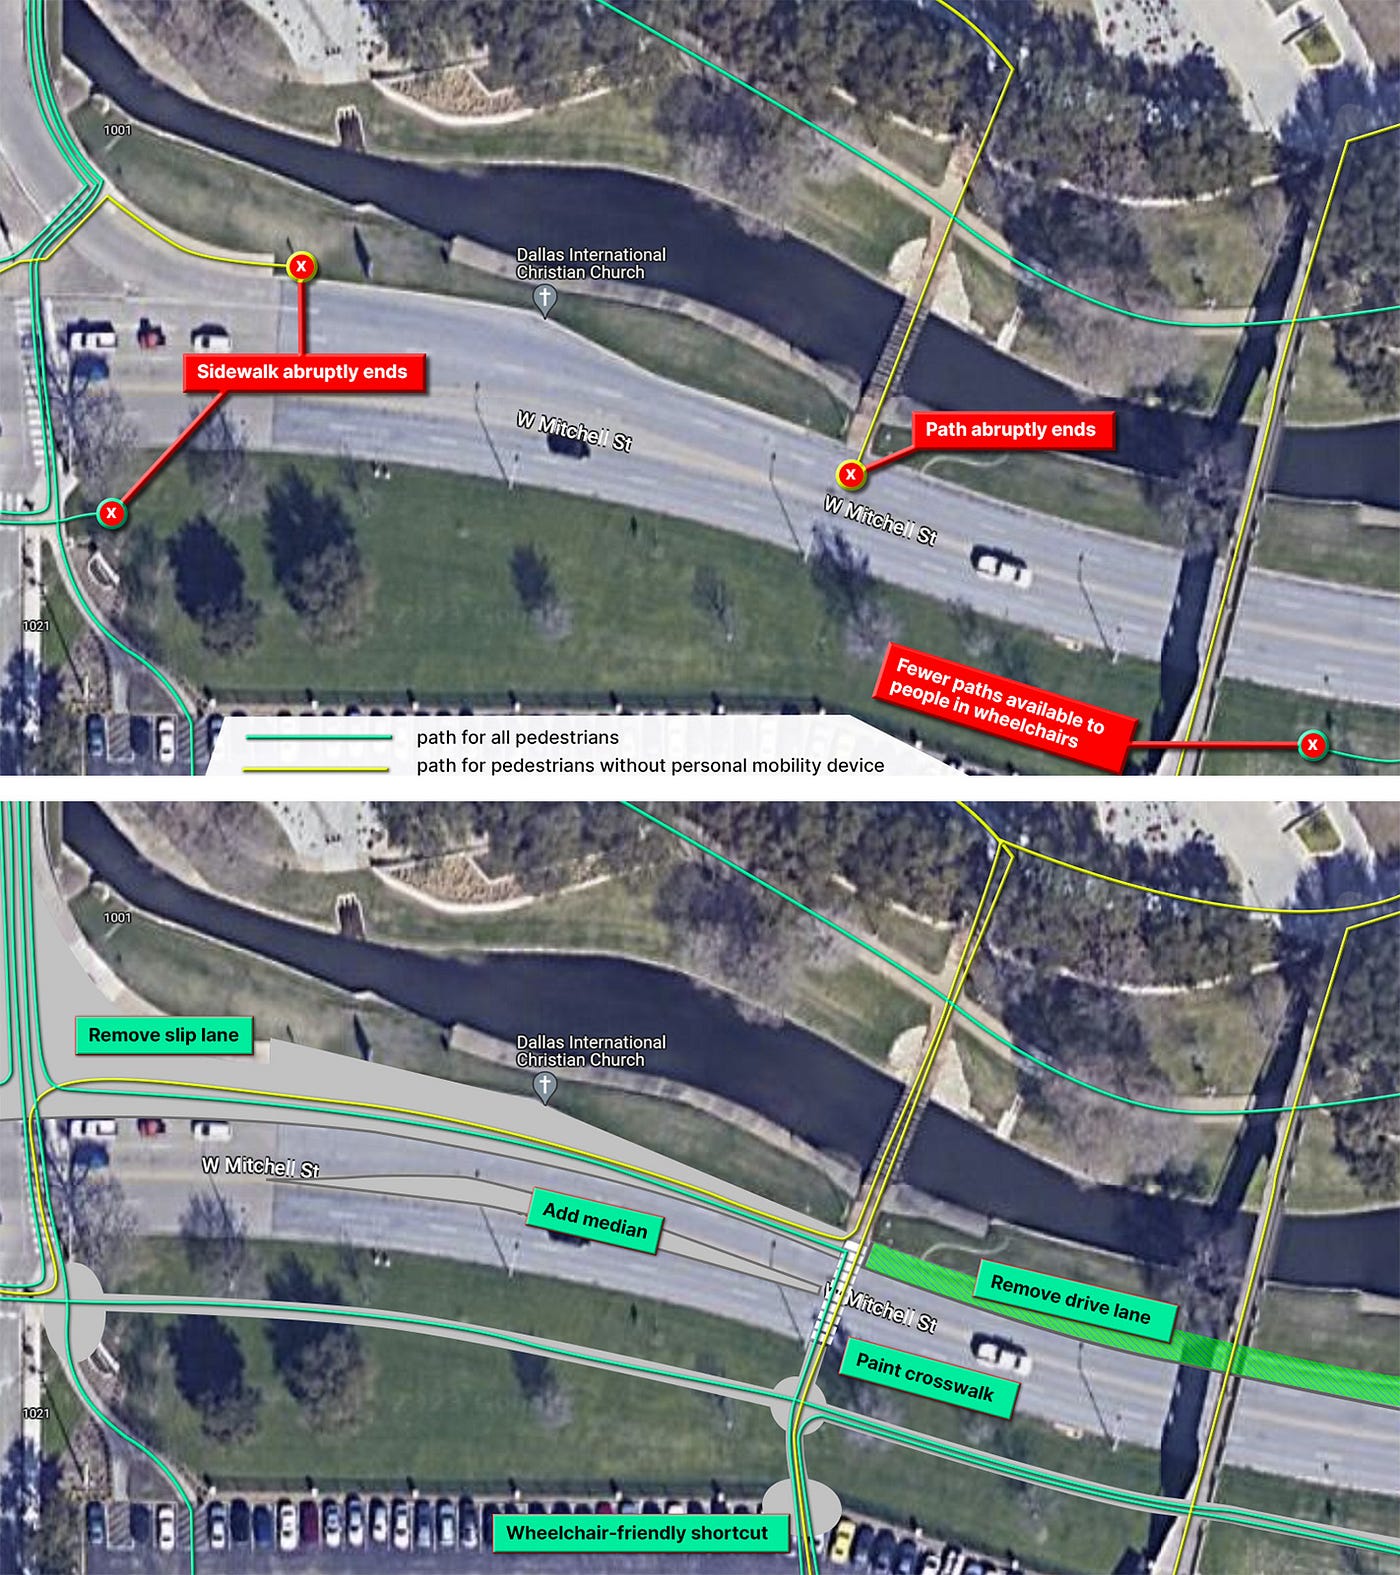 Two satellite images of West Mitchell Street, east of South Cooper Street. The first image shows where pedestrian paths abruptly end. The second image illustrates recommendations to increase wheelchair accessibility and slow down car traffic to improve safety of pedestrian crossings.